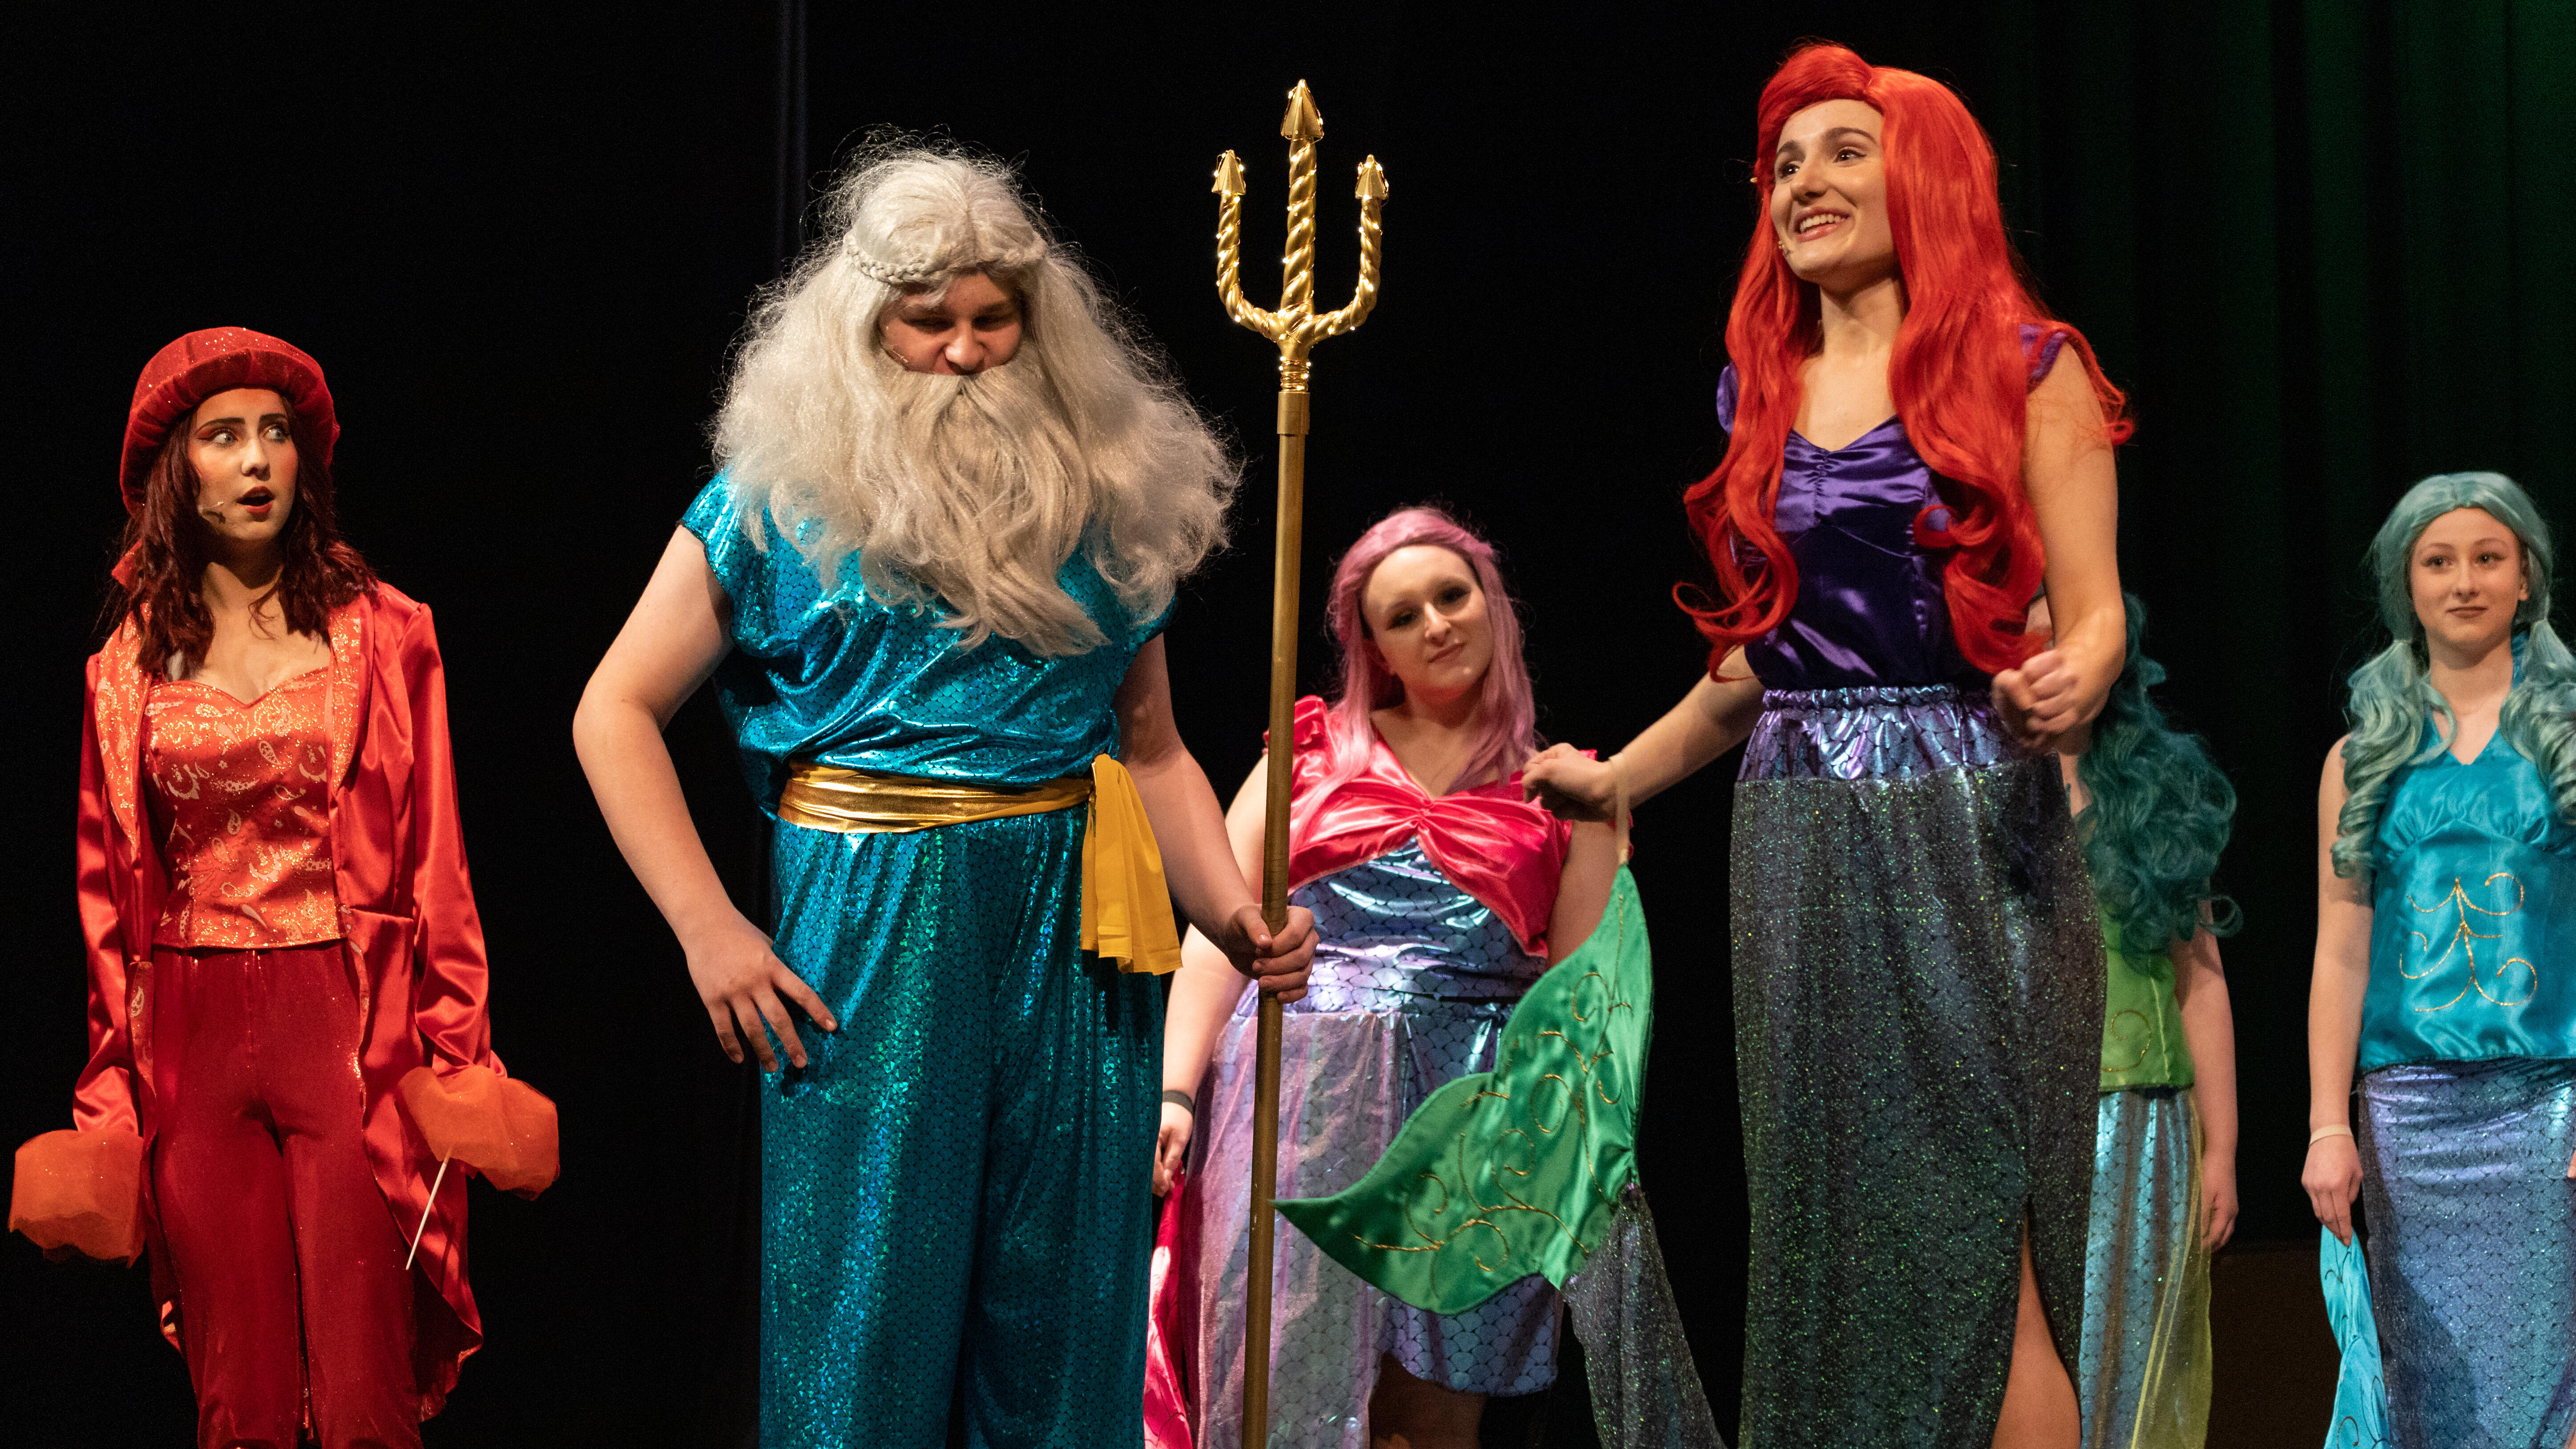 A scene from The Little Mermaid, as Ariel speaks with King Triton and Sebastian as the ensemble looks on behind them on stage